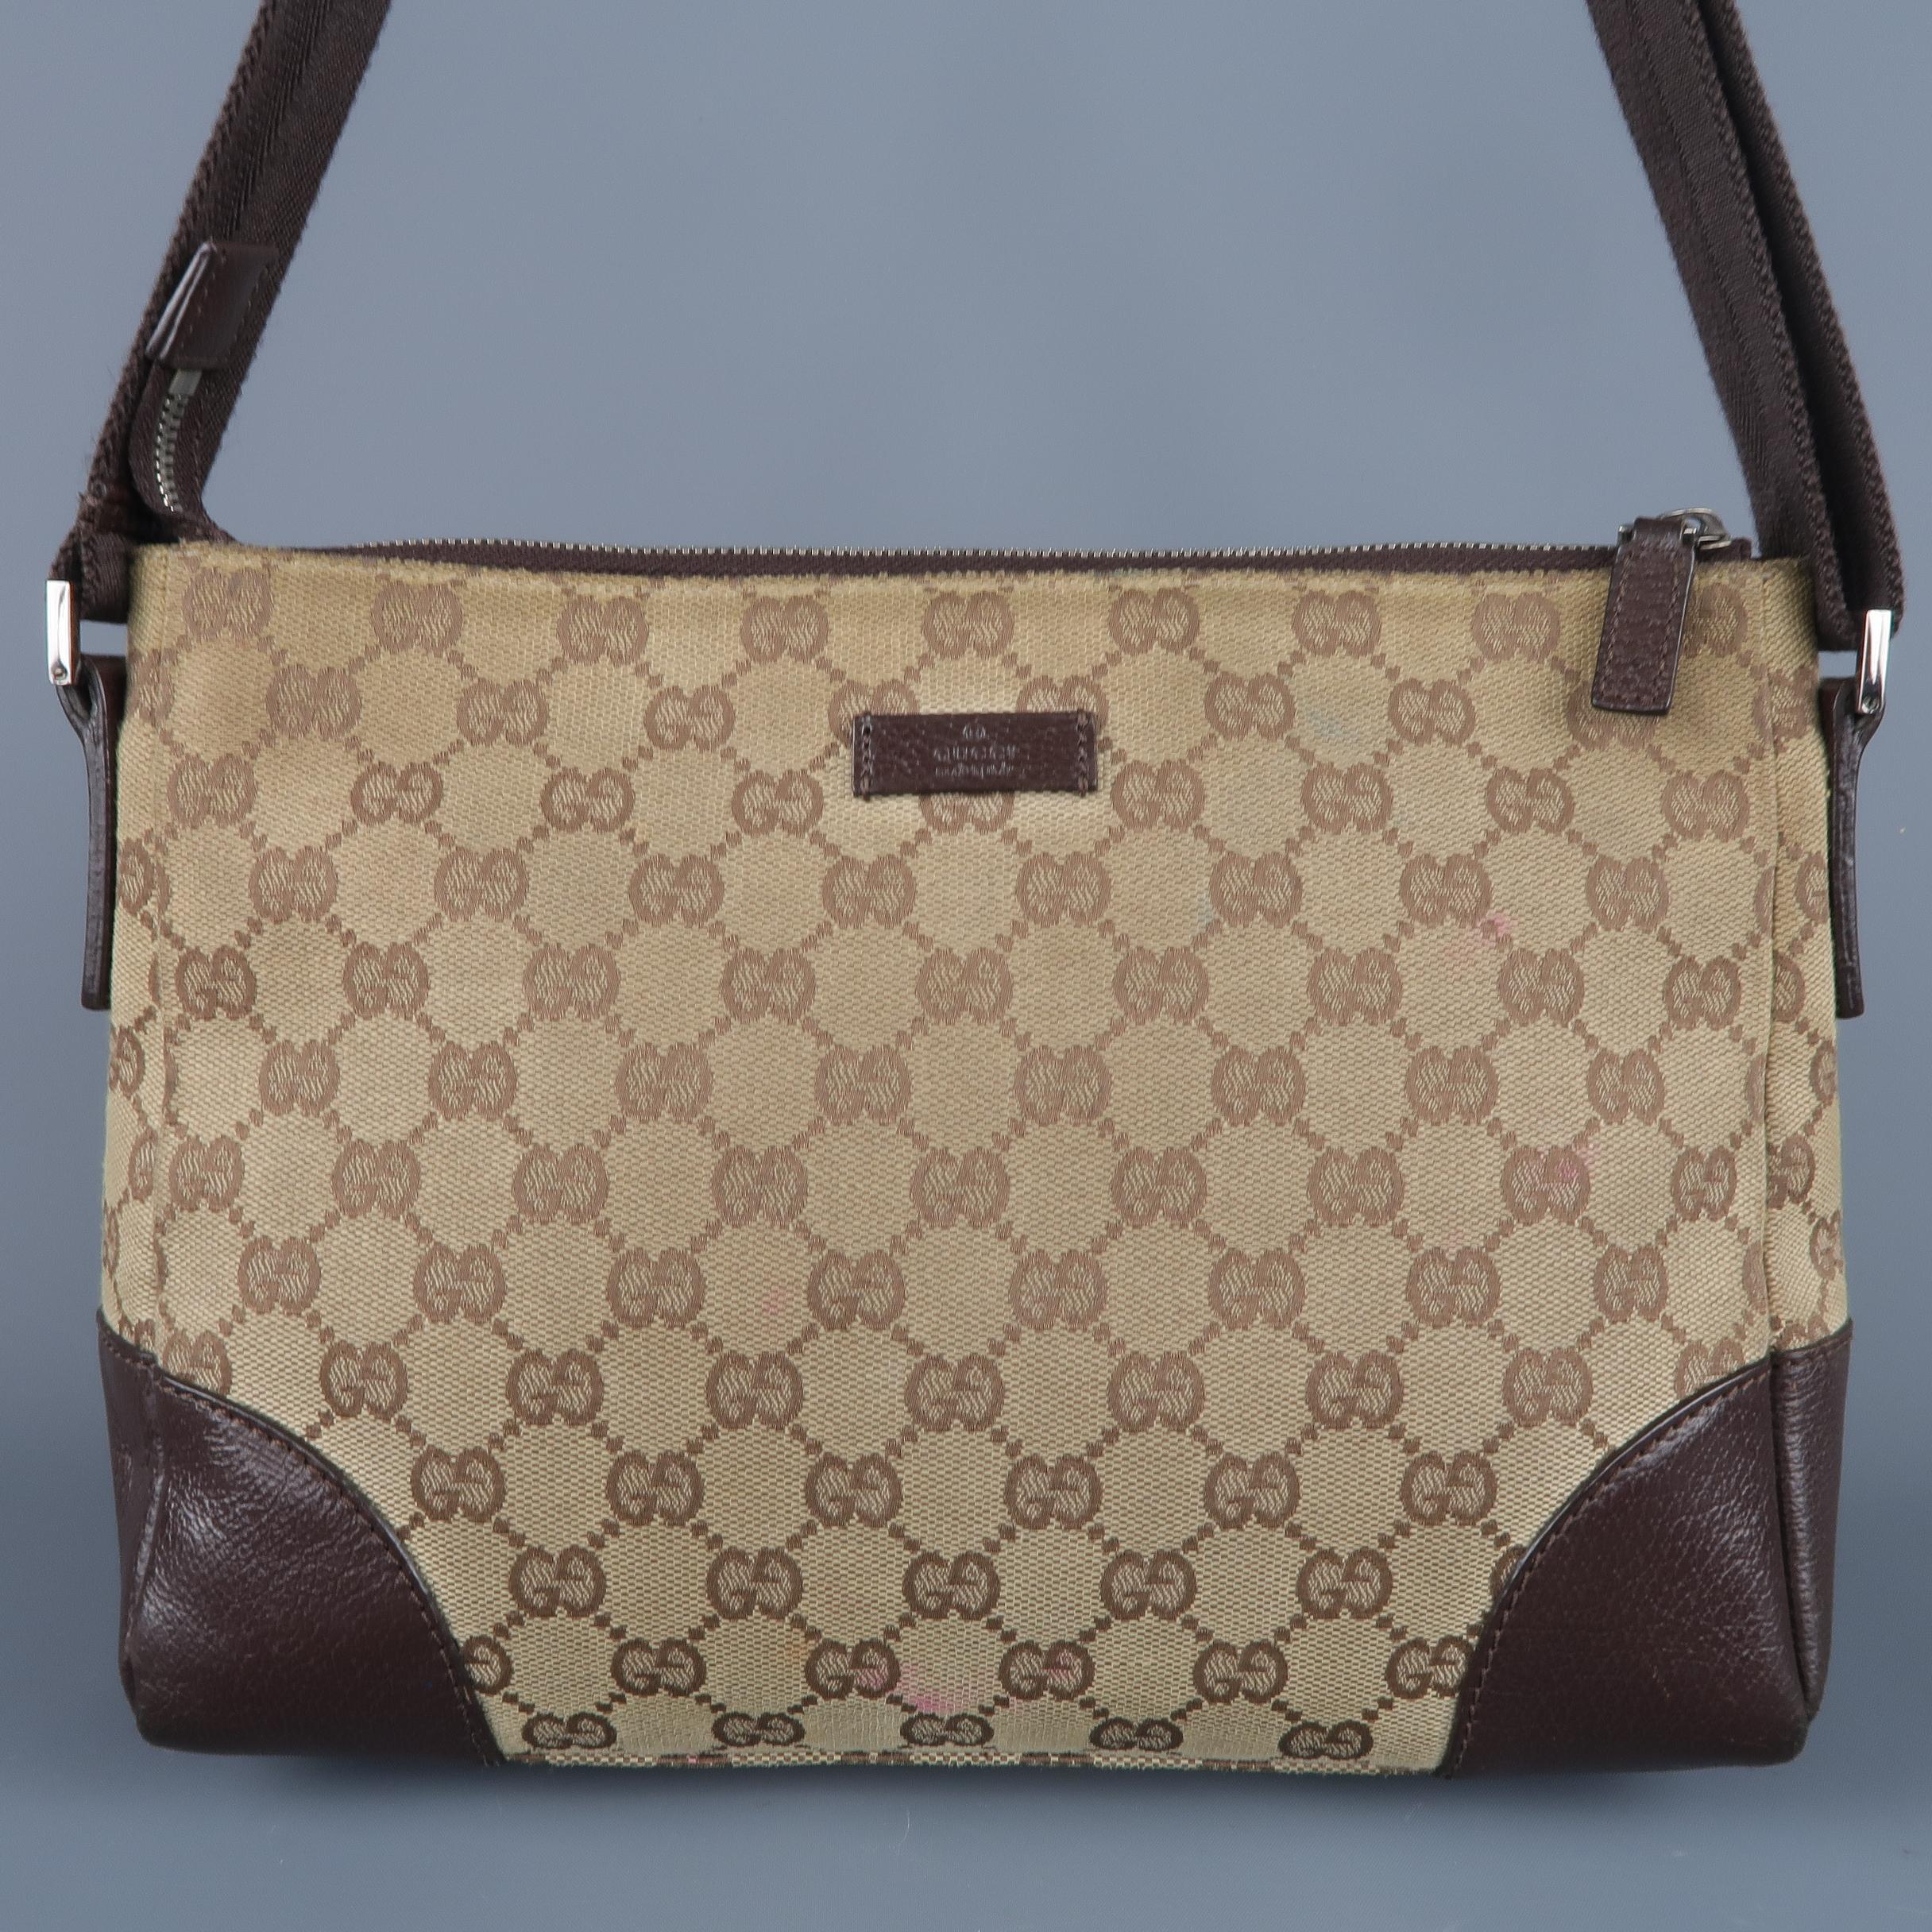 Vintage GUCCI bag comes in beige Guccissima monogram canvas with brown textured leather detailing, top zip closure, and adjustable webbing shoulder / crossbody strap. Stain and wear throughout. As-is. Made in Italy.
 
Fair Pre-Owned Condition.
